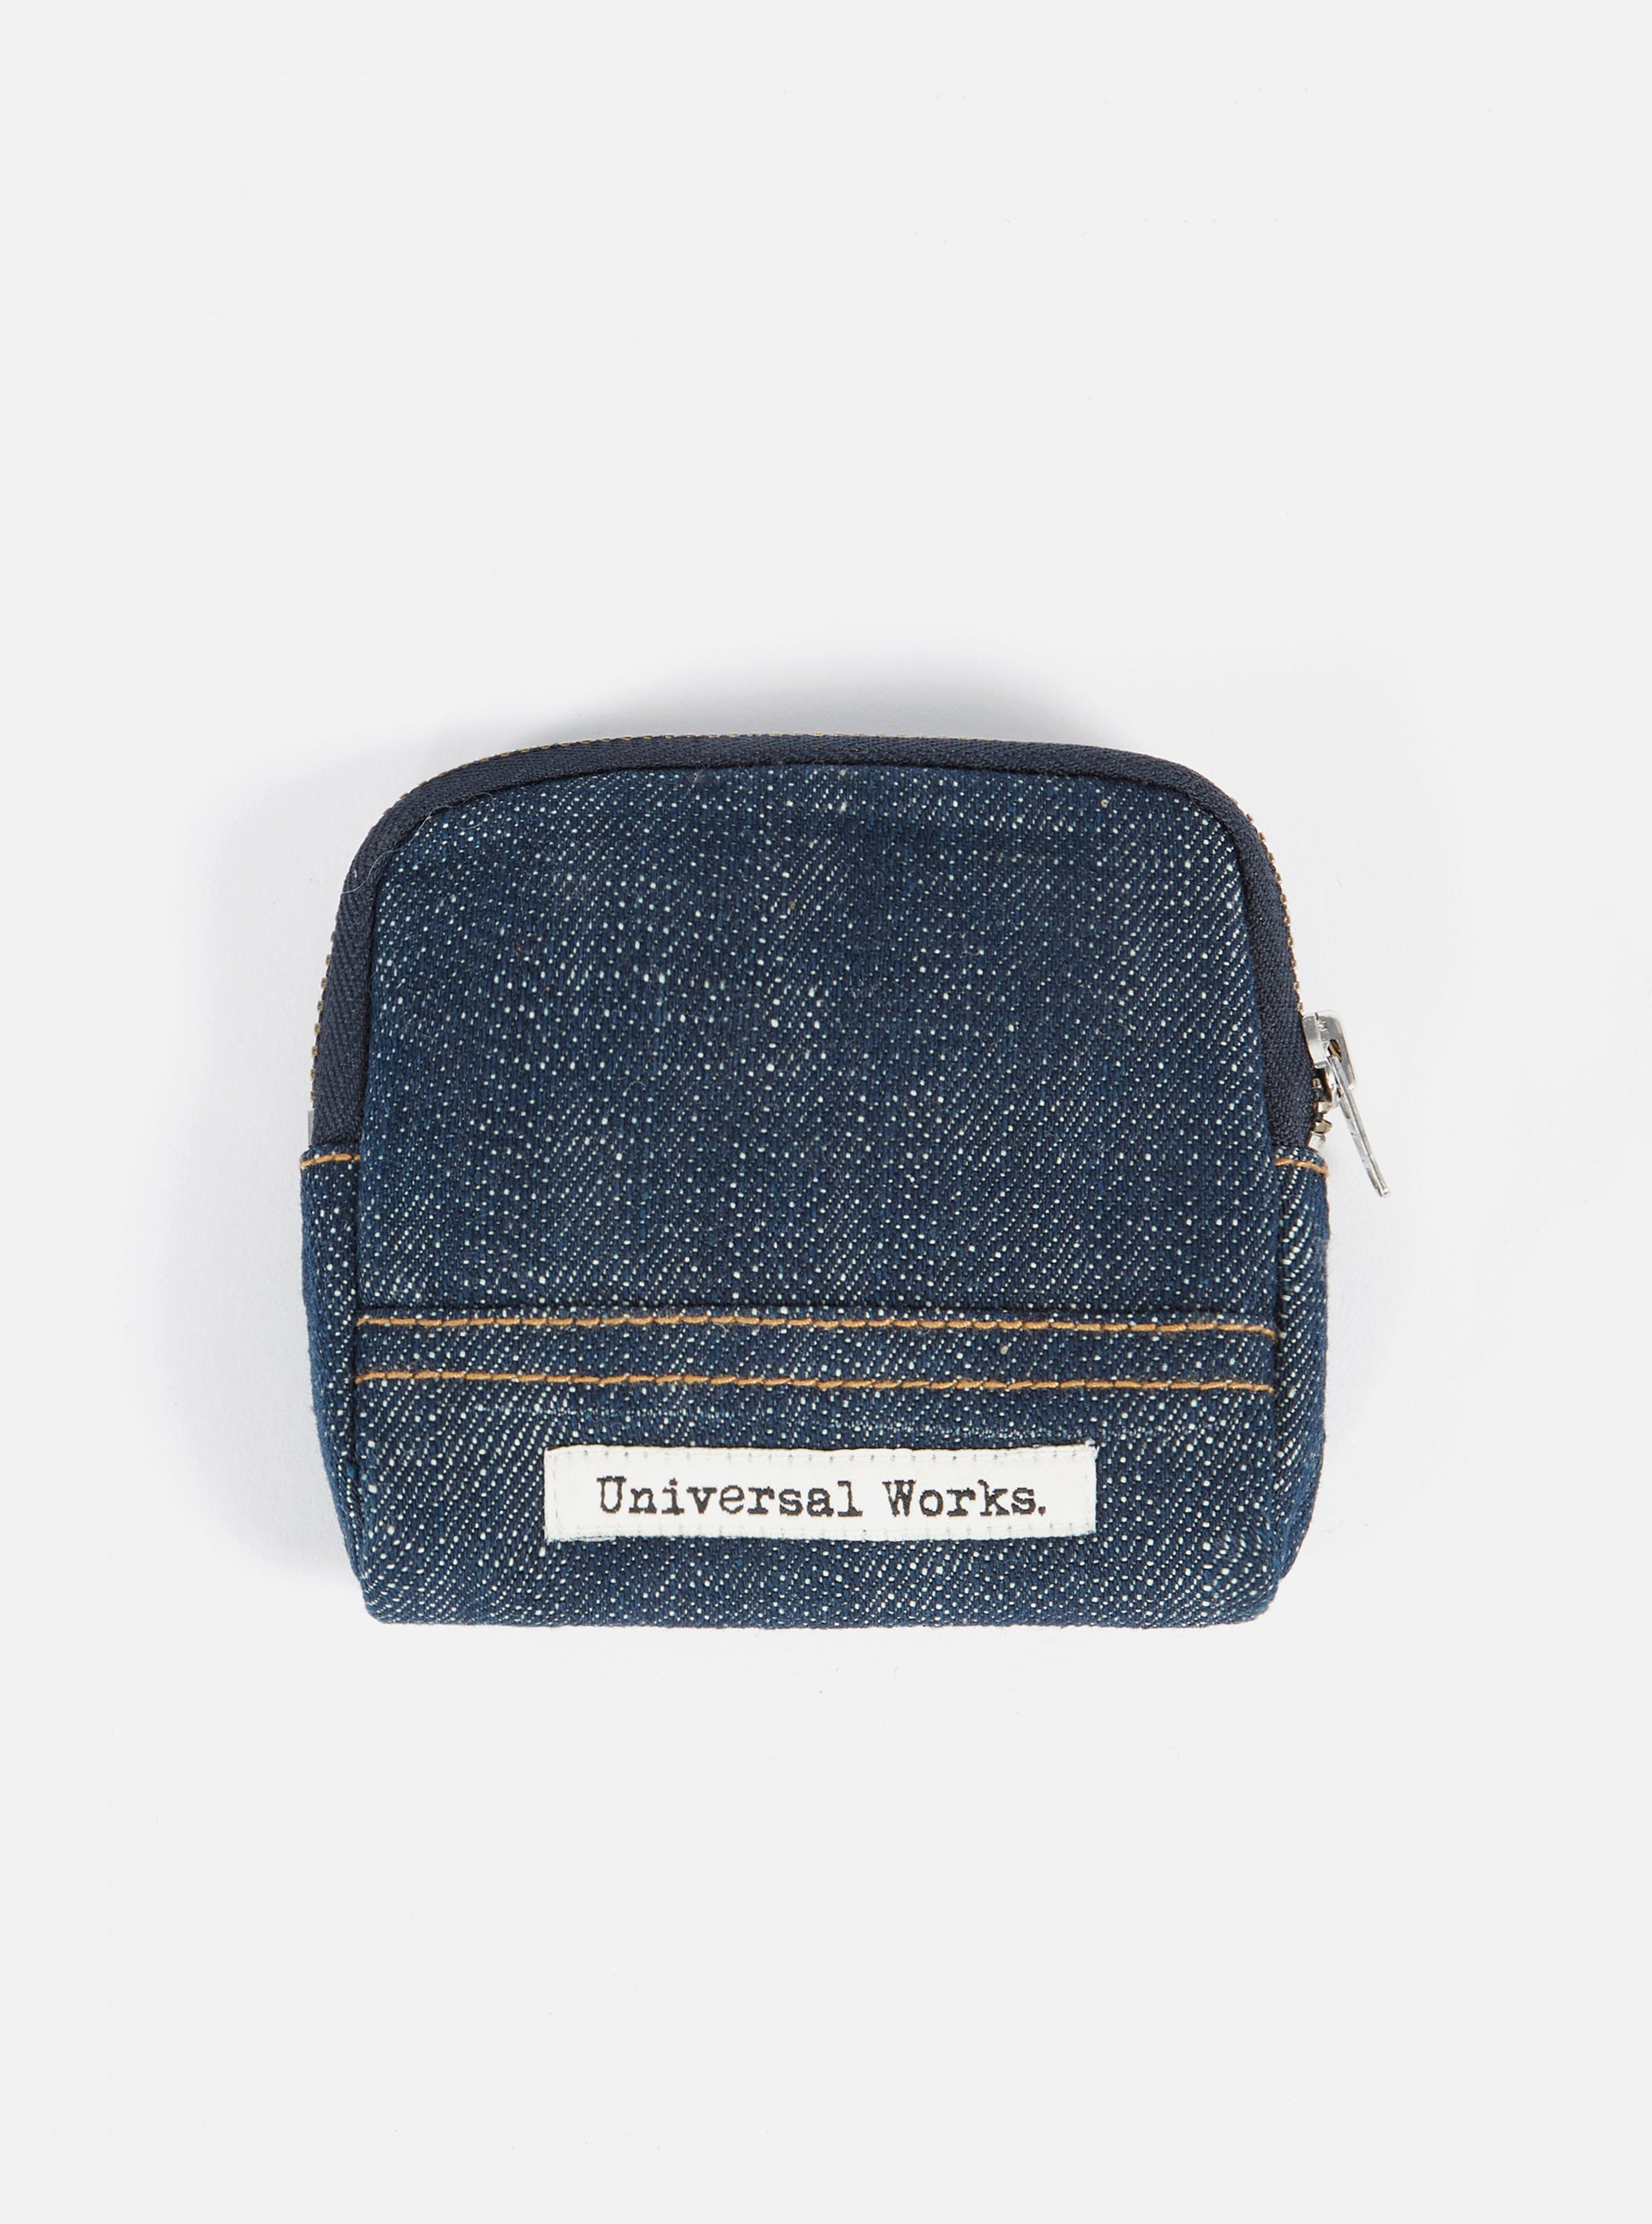 Denim Boro Sashiko Wallet, Recycled Jeans Coin Purse, Hand Stitch Patch  Purse, Zippered Pouch